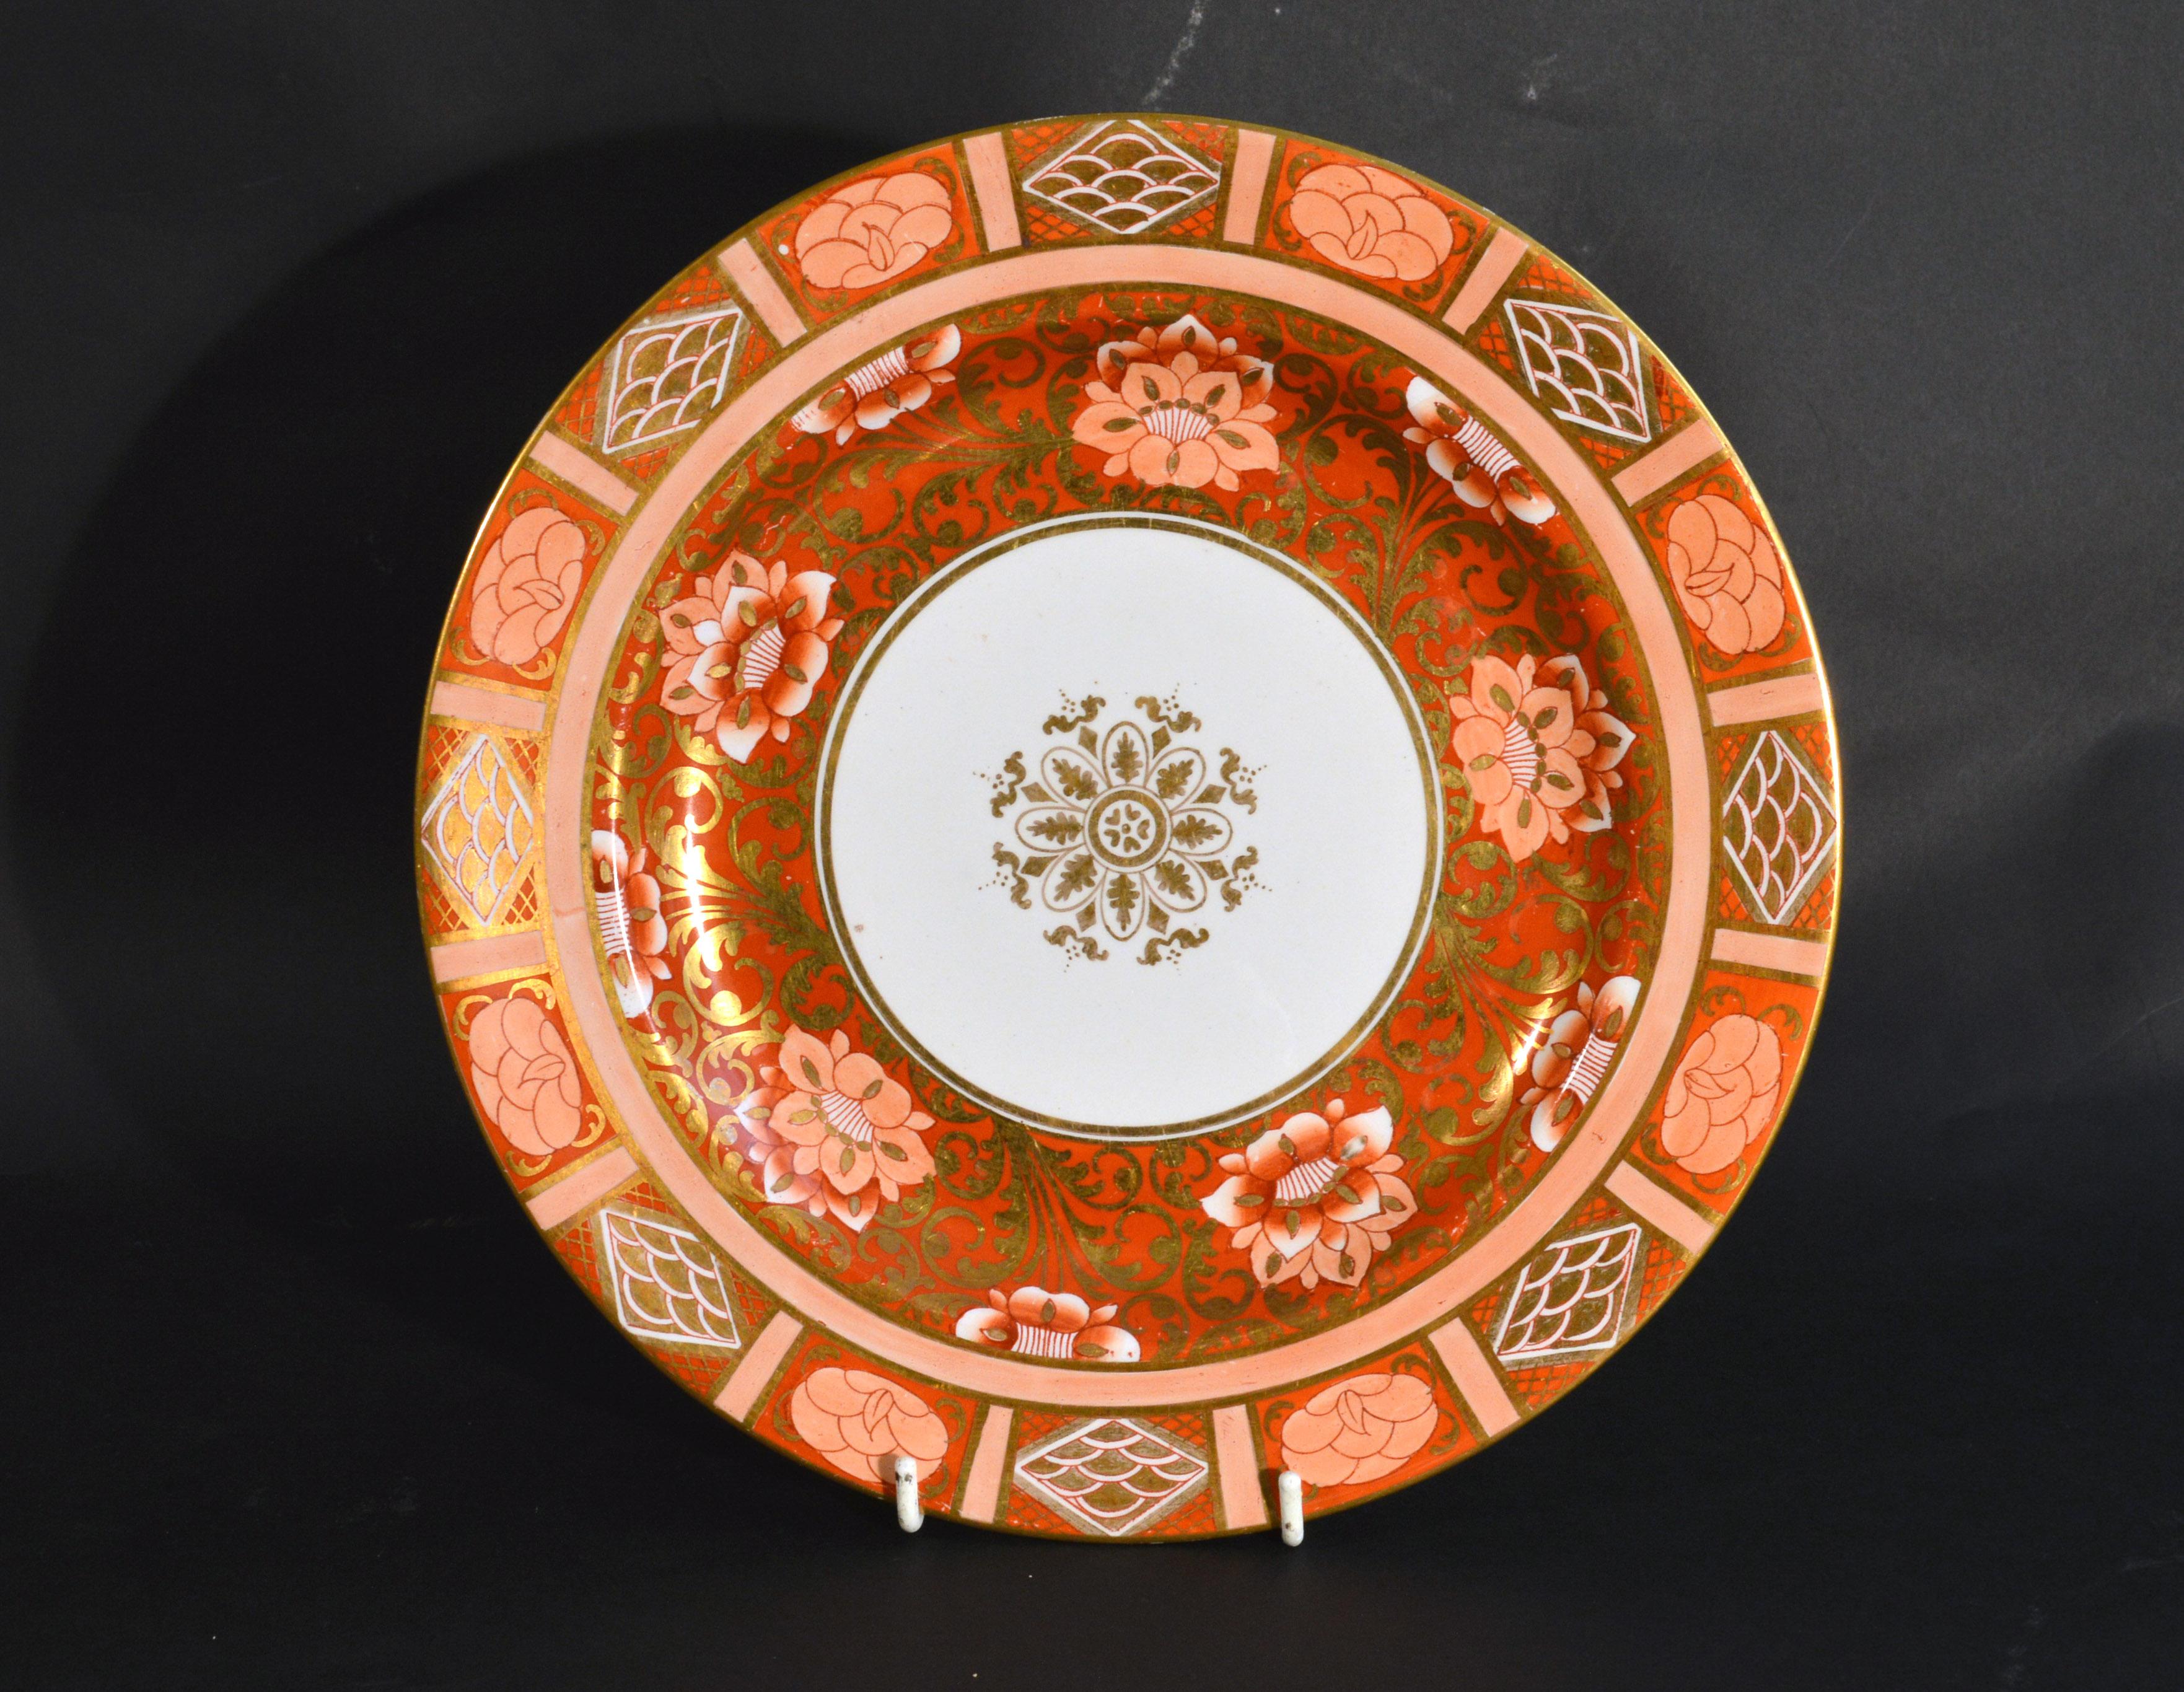 Ashworth Brothers Ironstone Dinner Service, circa 1893, Forty-Five Pieces, 6